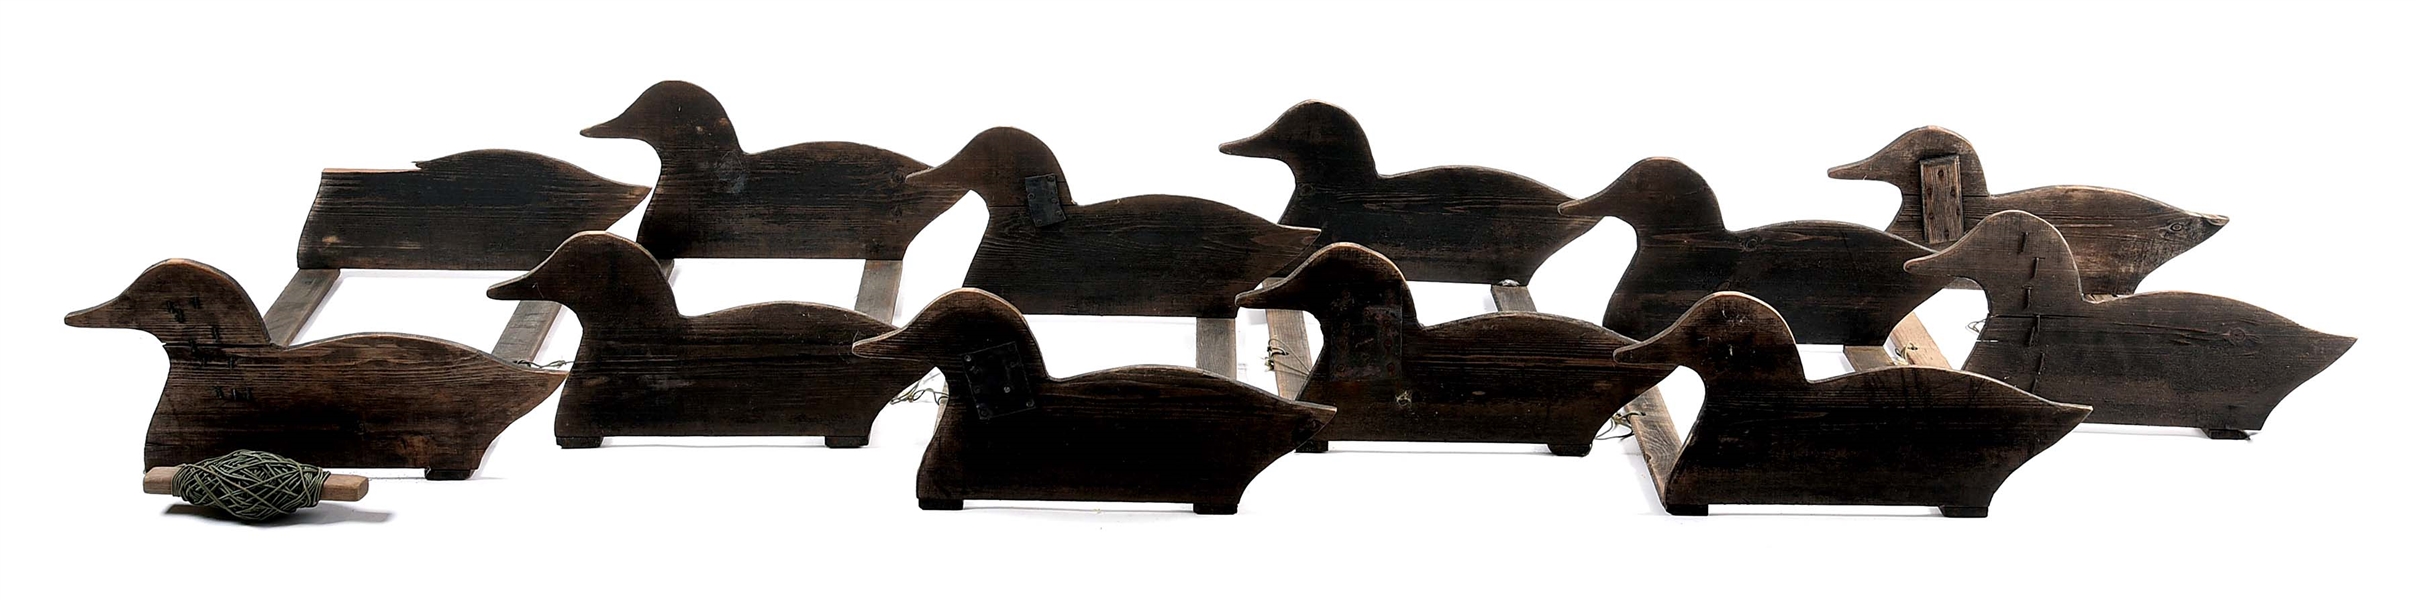 LOT OF 6 DOUBLE DUCK DECOYS.